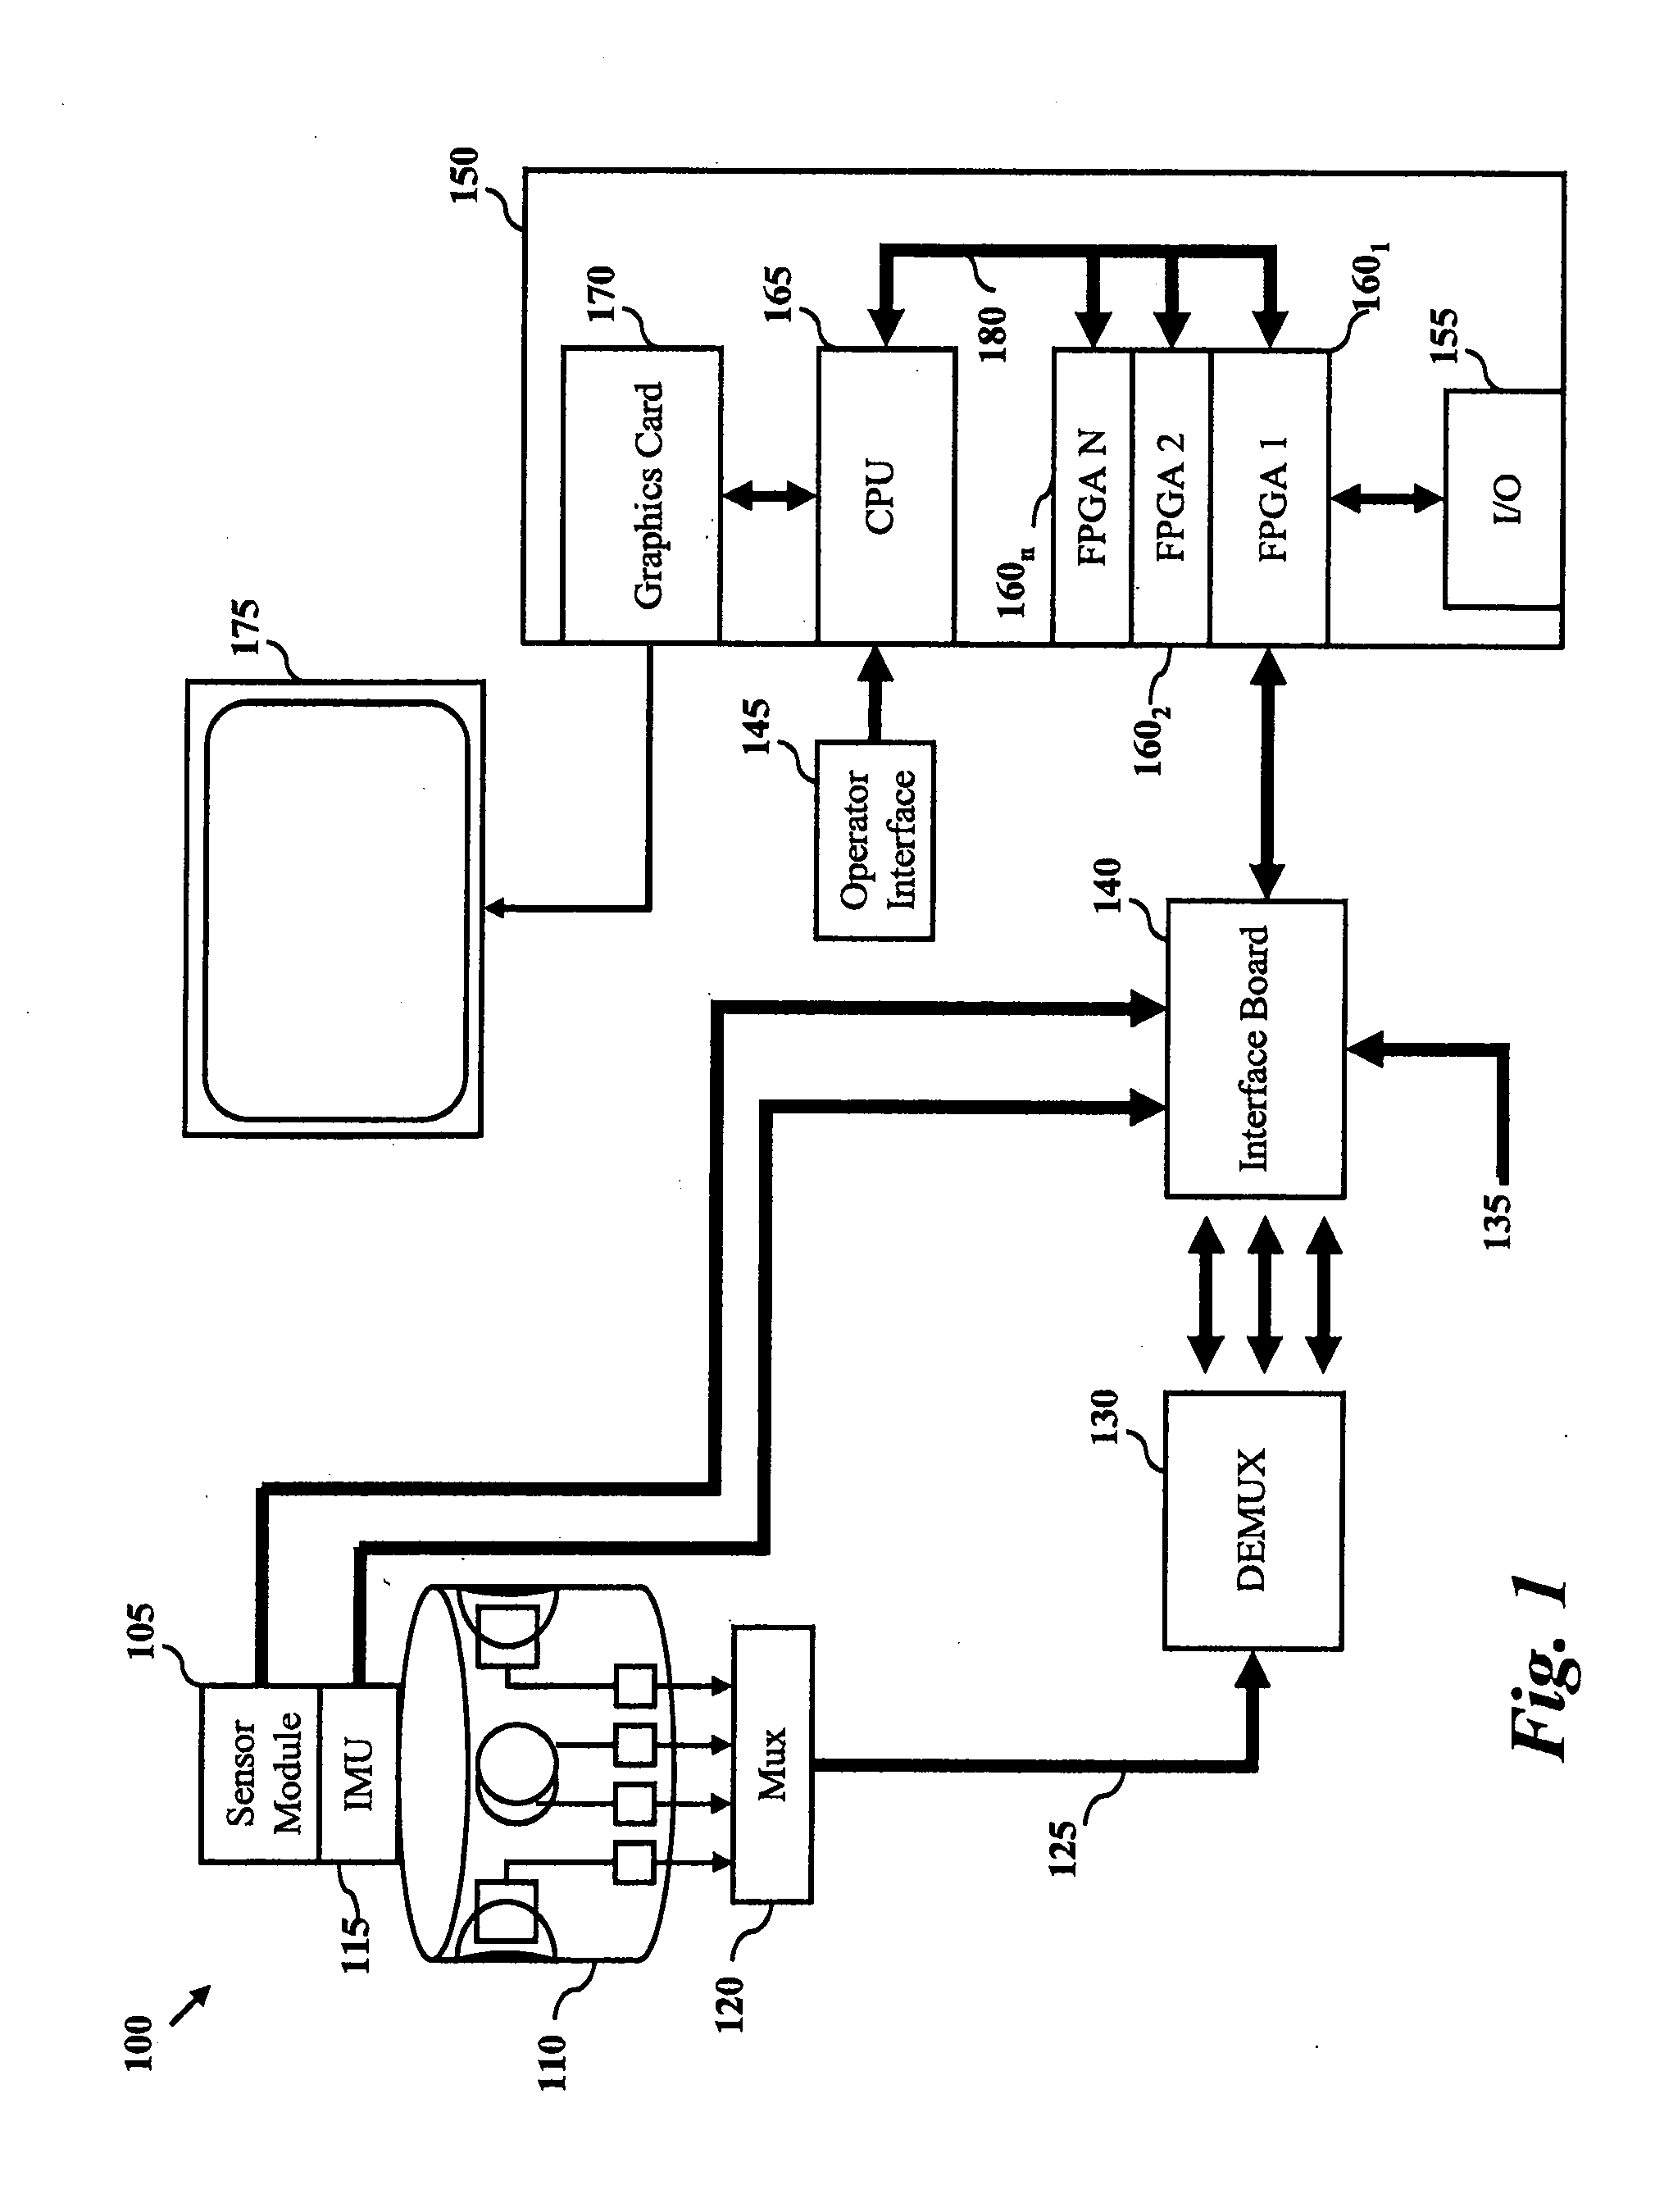 System for Panoramic Image Processing